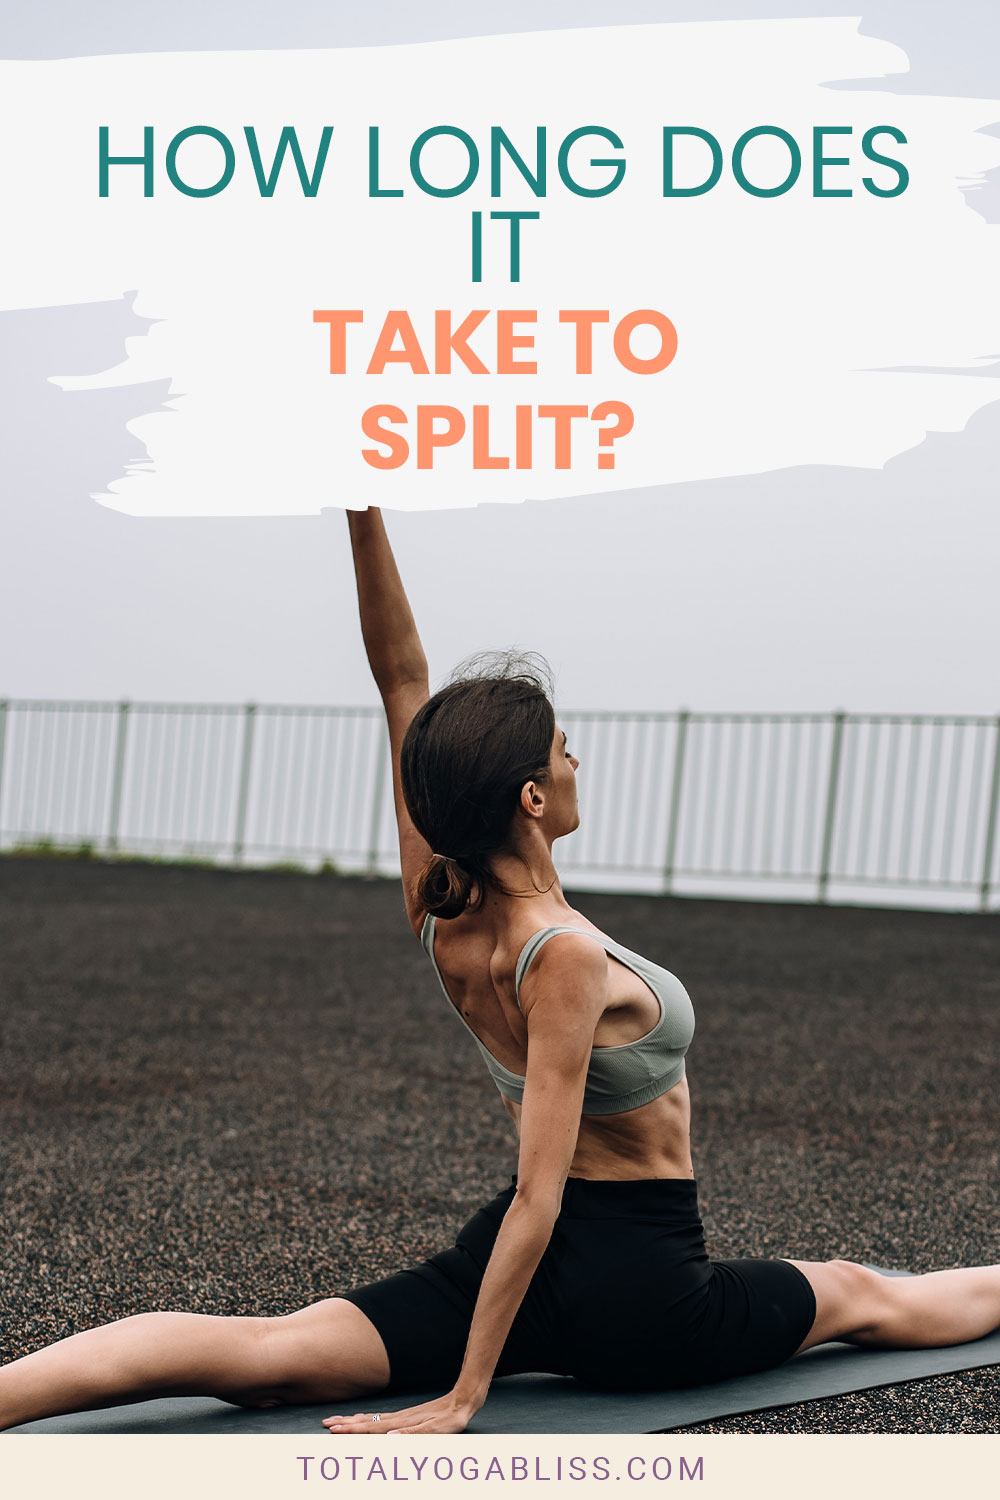 How Long Does It Take To Split?